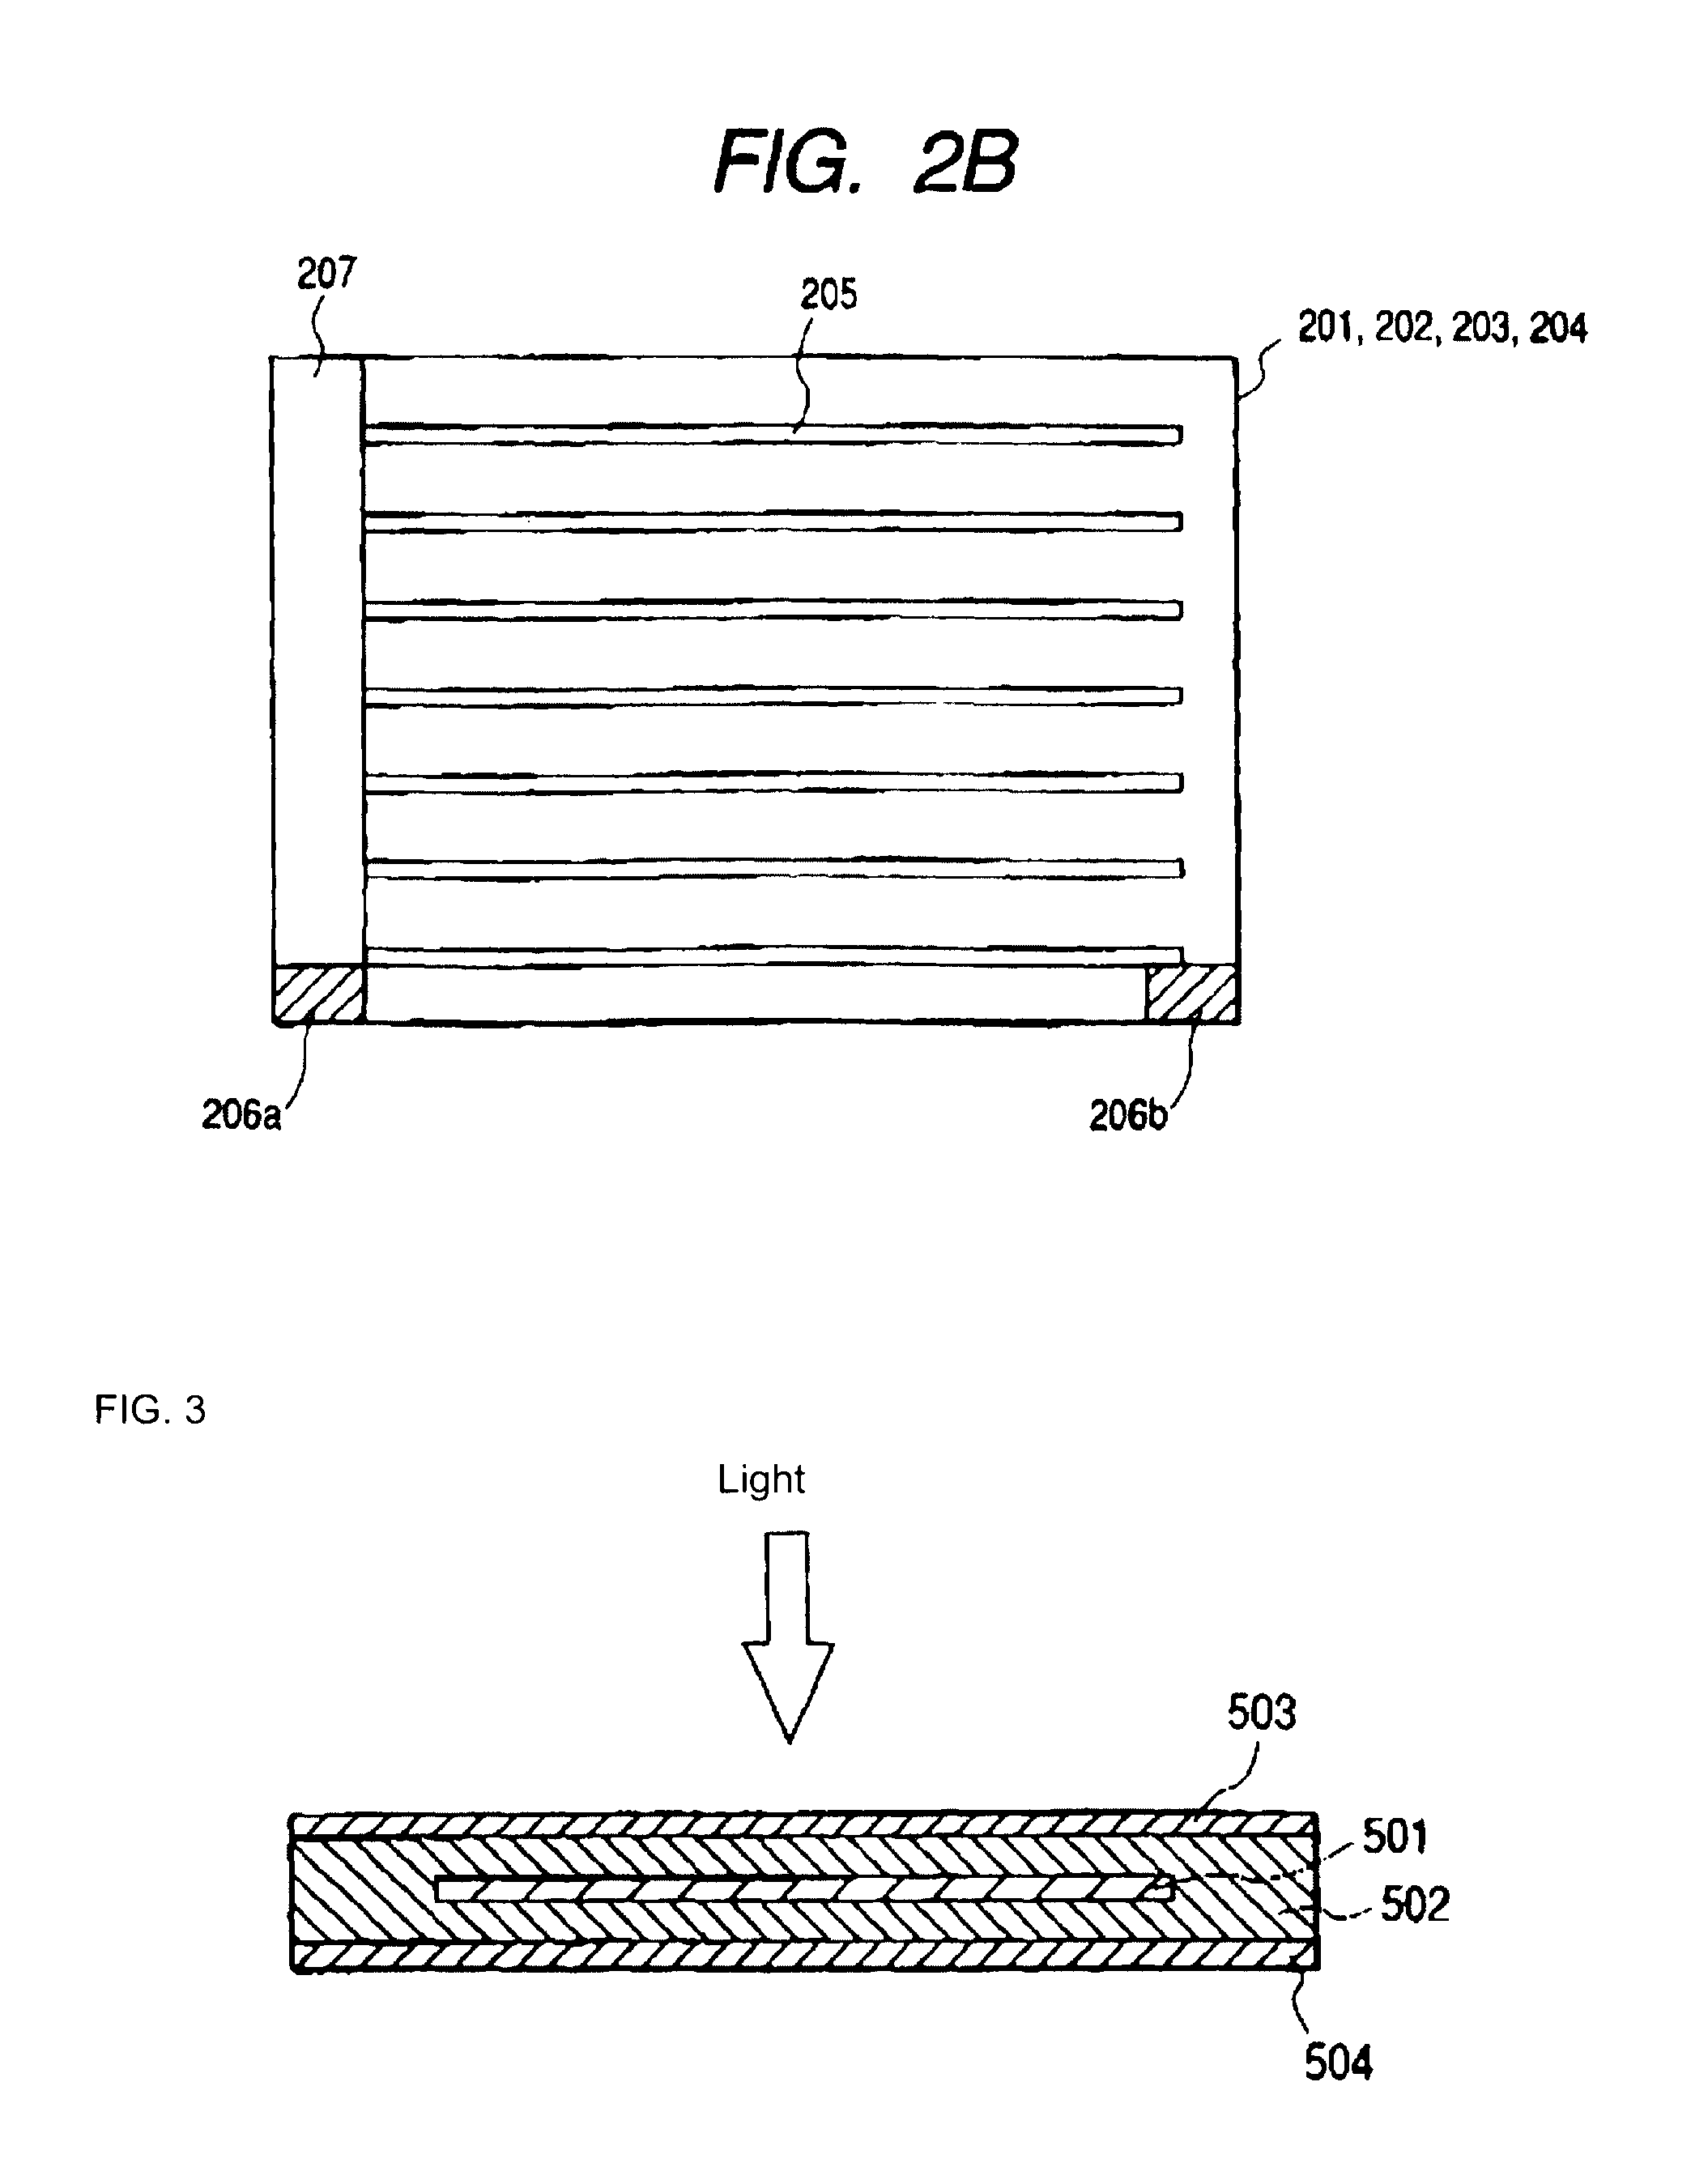 Production of solar cell modules